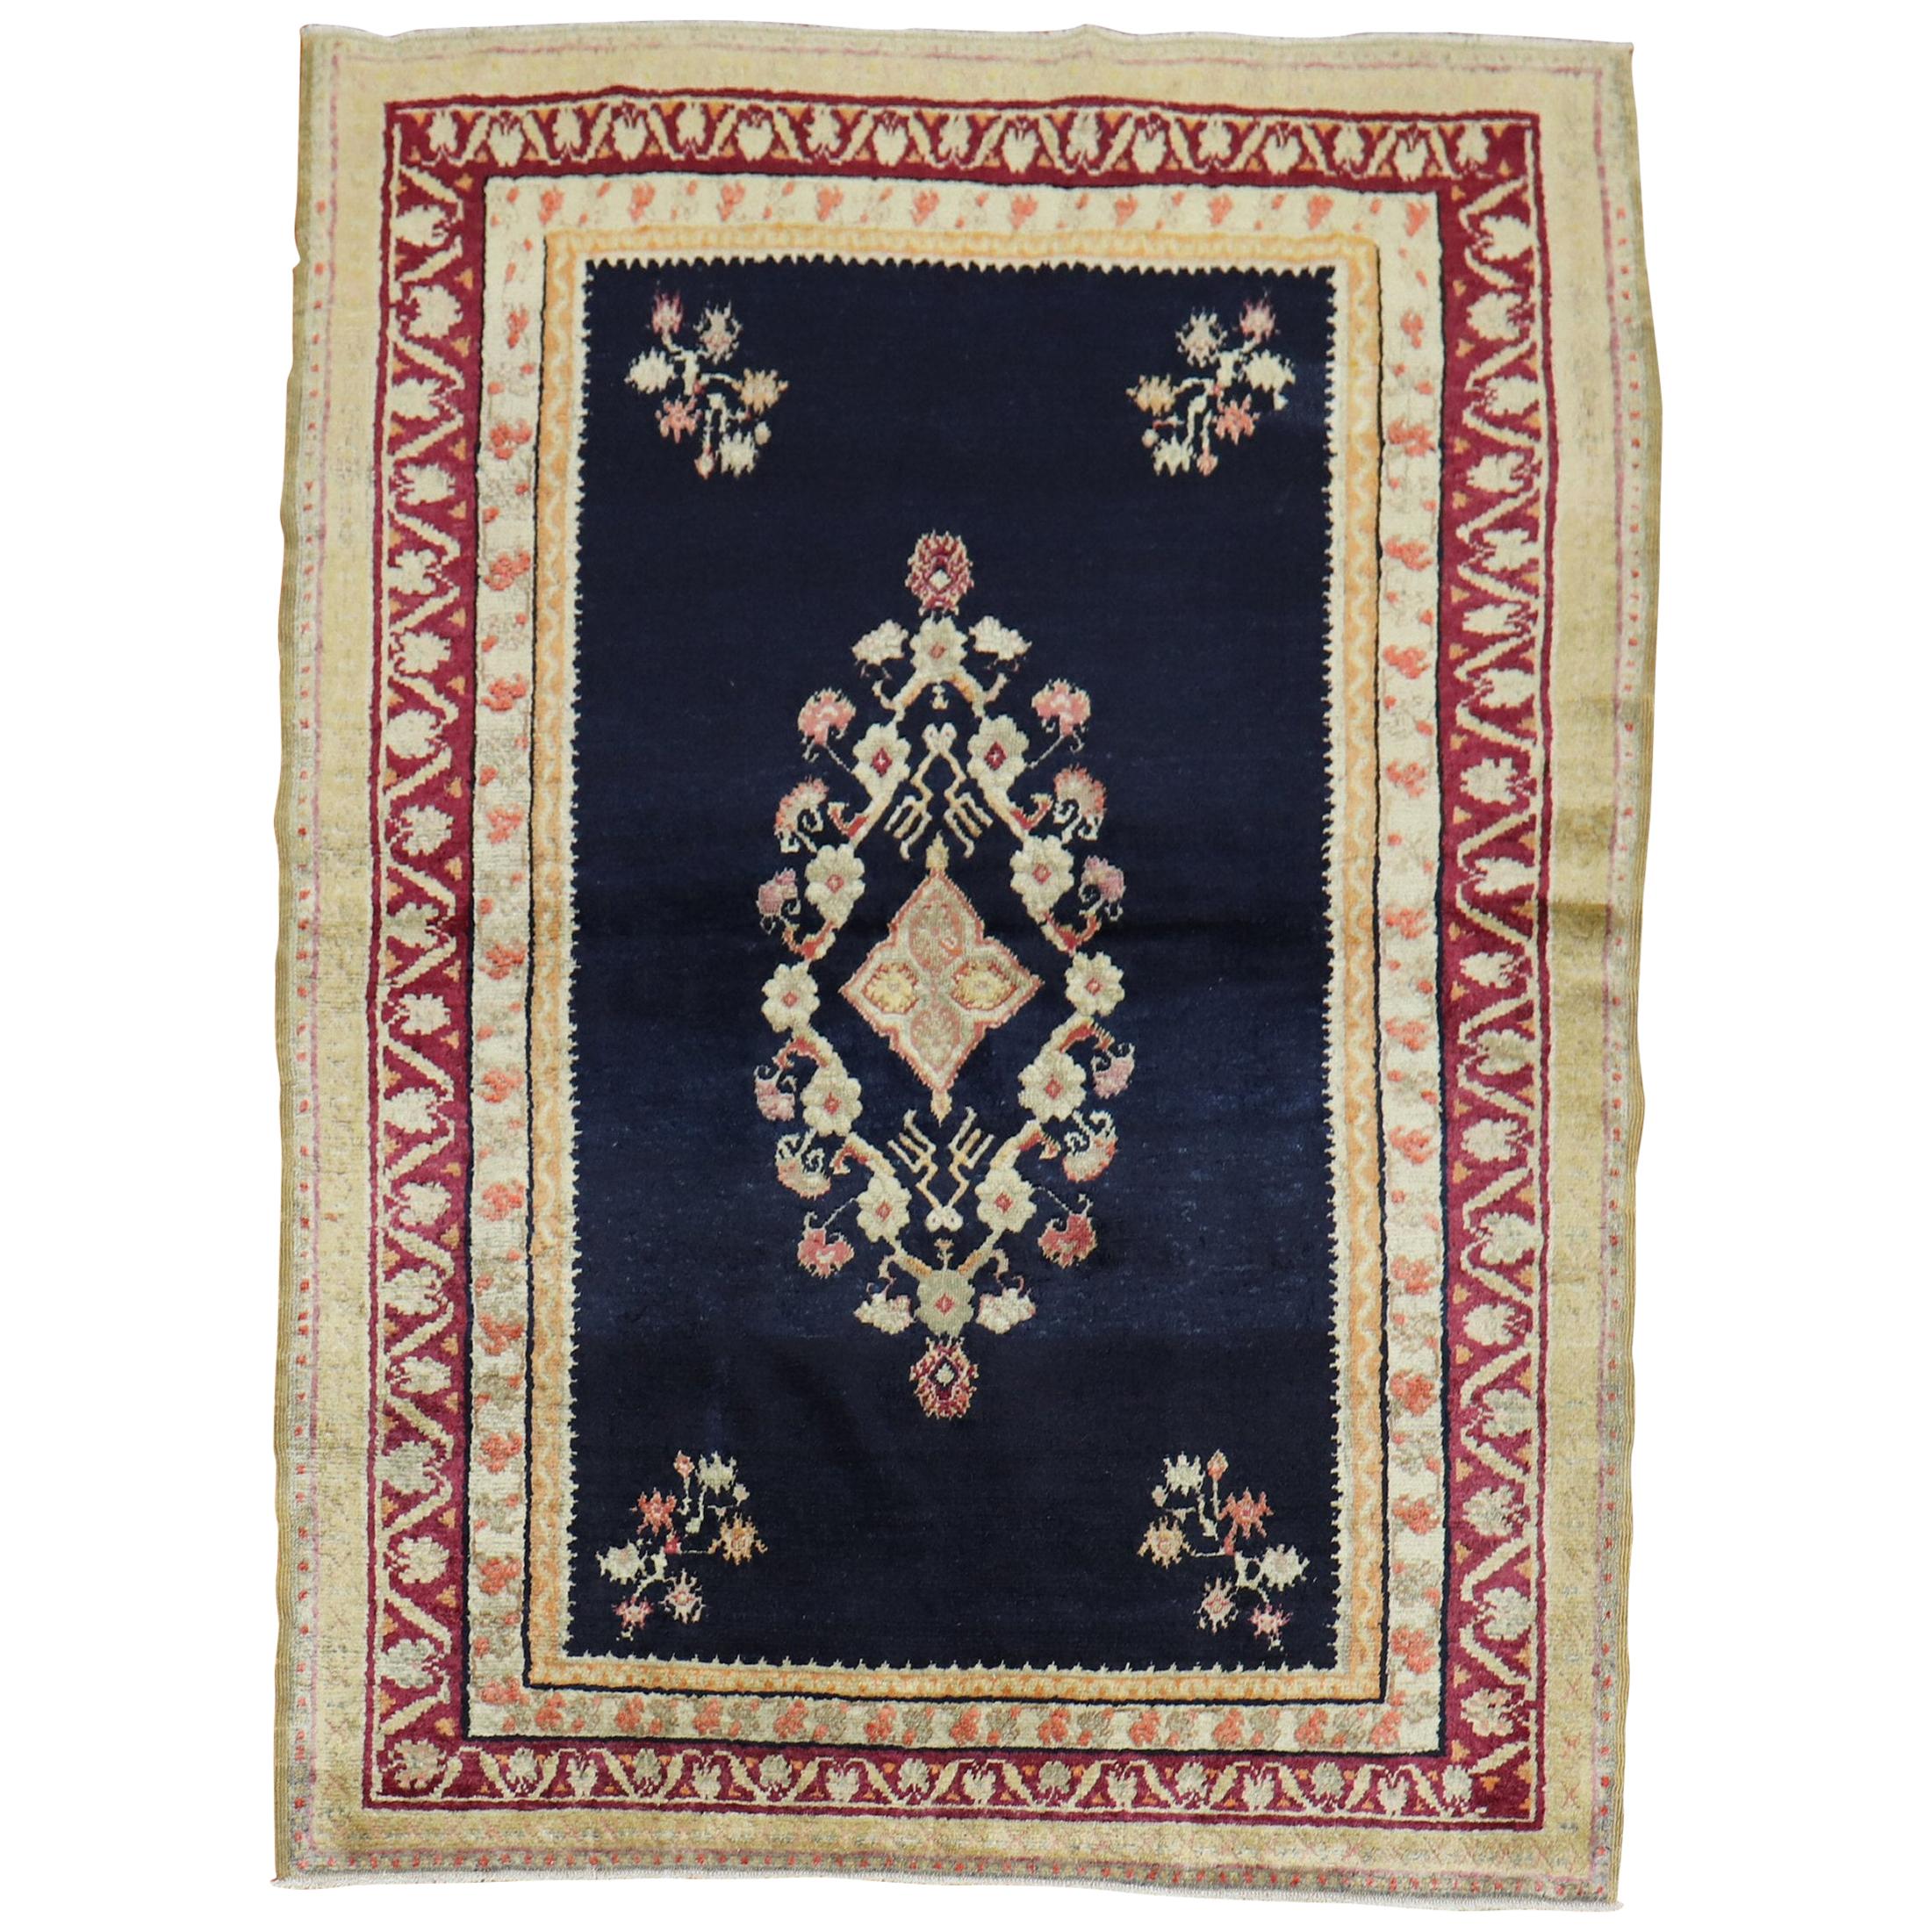 Elegant Antique Turkish Ghiordes Floral Rug, Early 20th Century For Sale